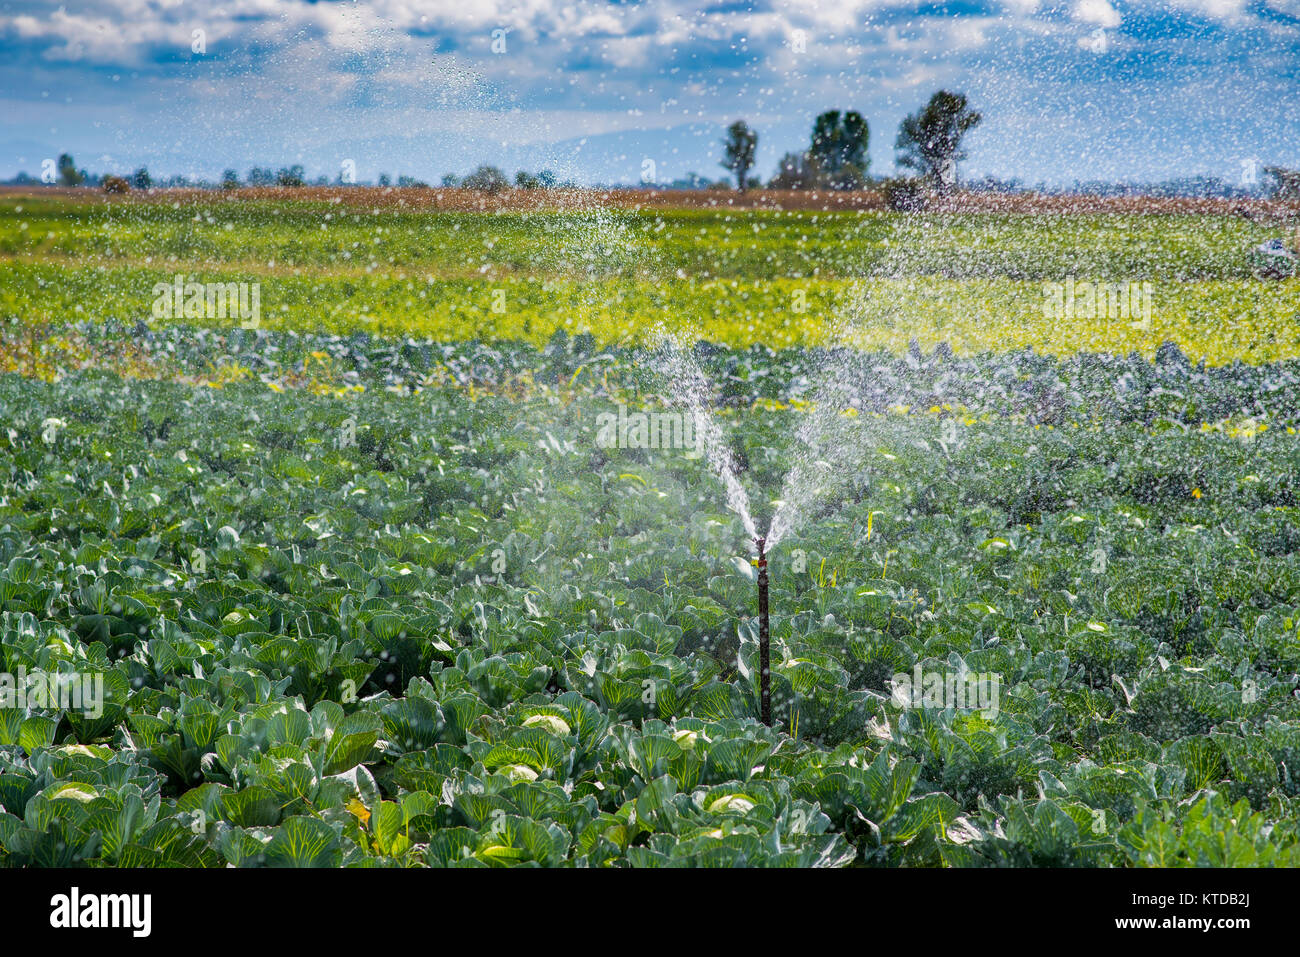 Agricultural irrigation system for watering cabbage field Stock Photo